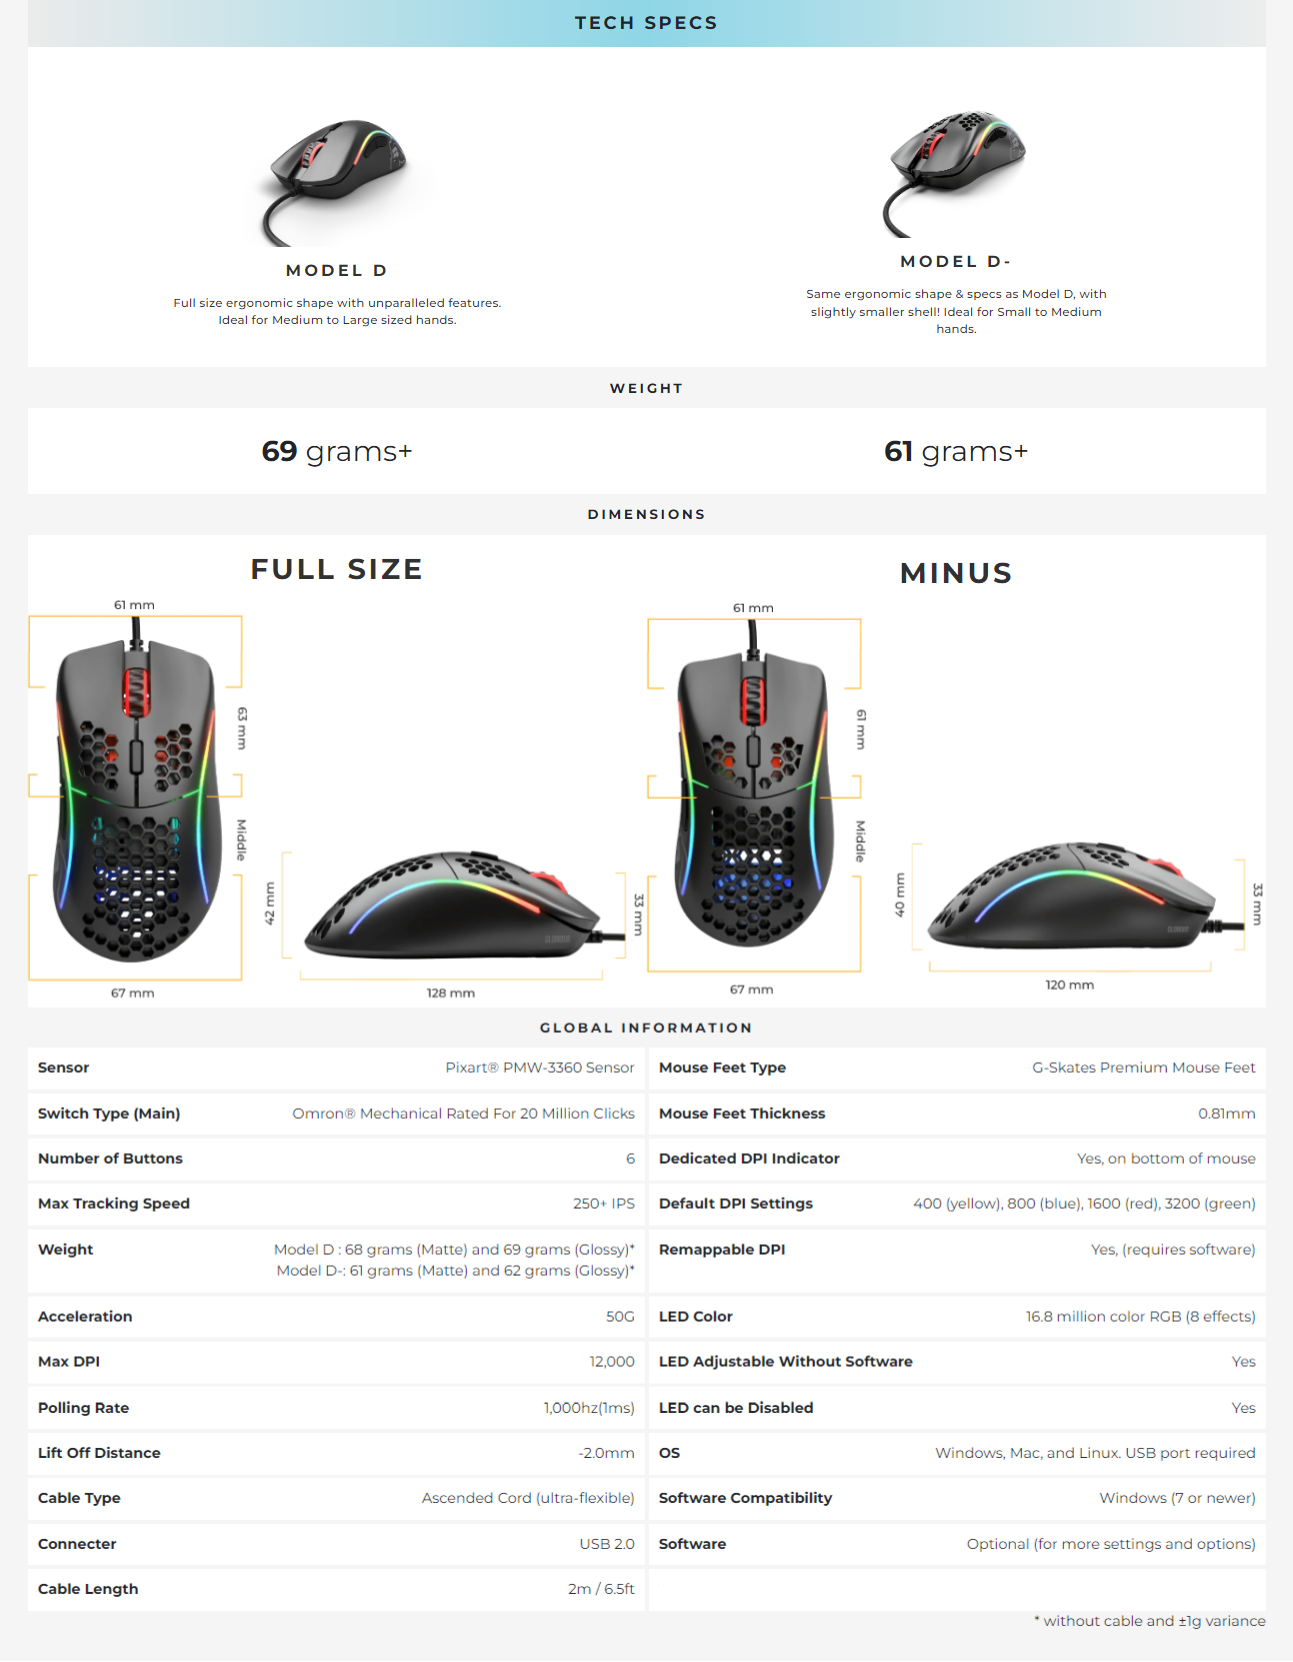 A large marketing image providing additional information about the product Glorious Model D Wired Gaming Mouse - Glossy White - Additional alt info not provided